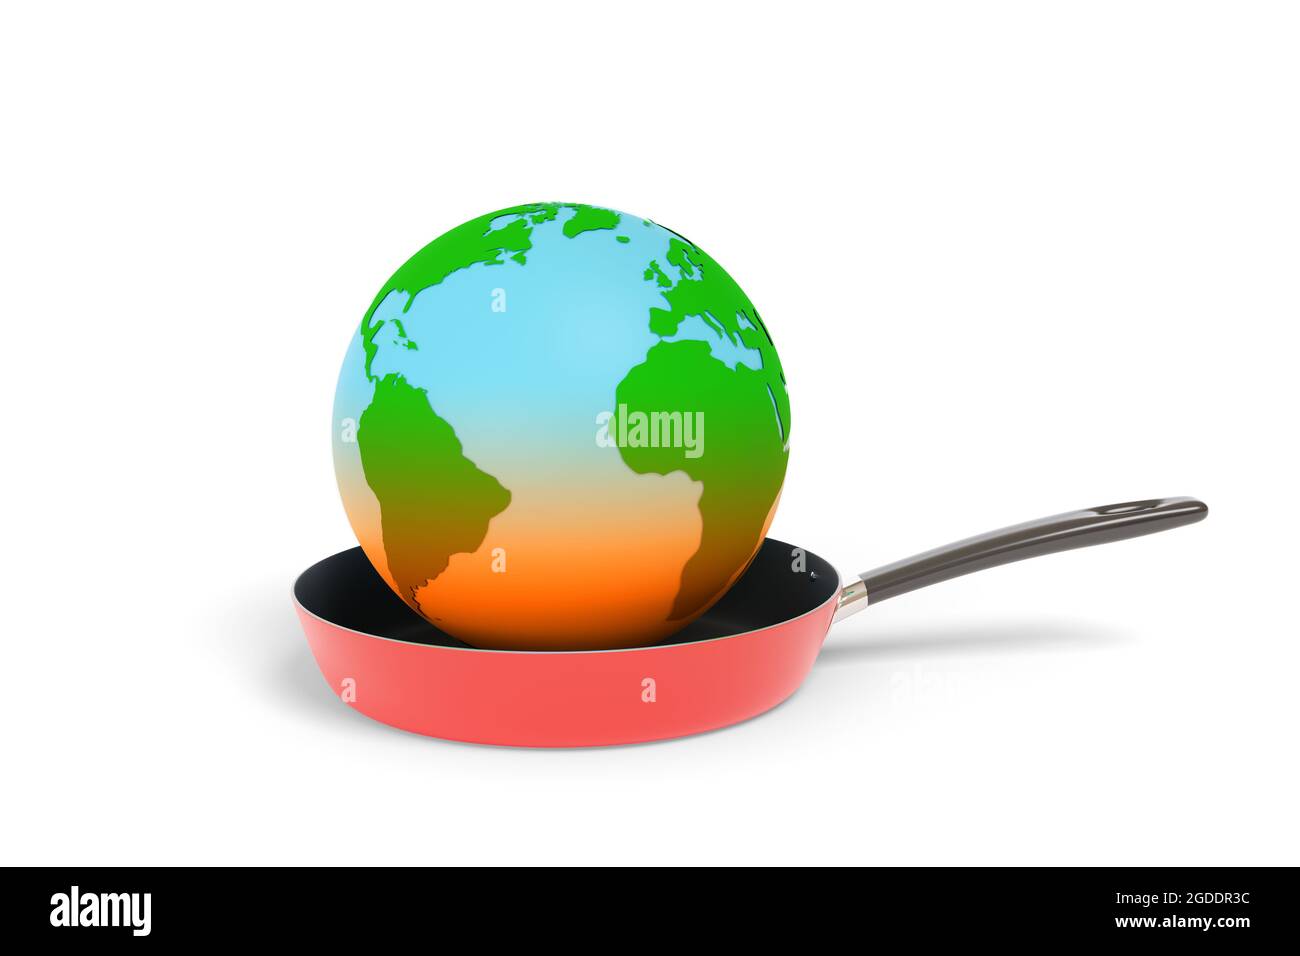 Planet earth heating up in a frying pan isolated on white background. Global warming concept. 3d illustration. Stock Photo